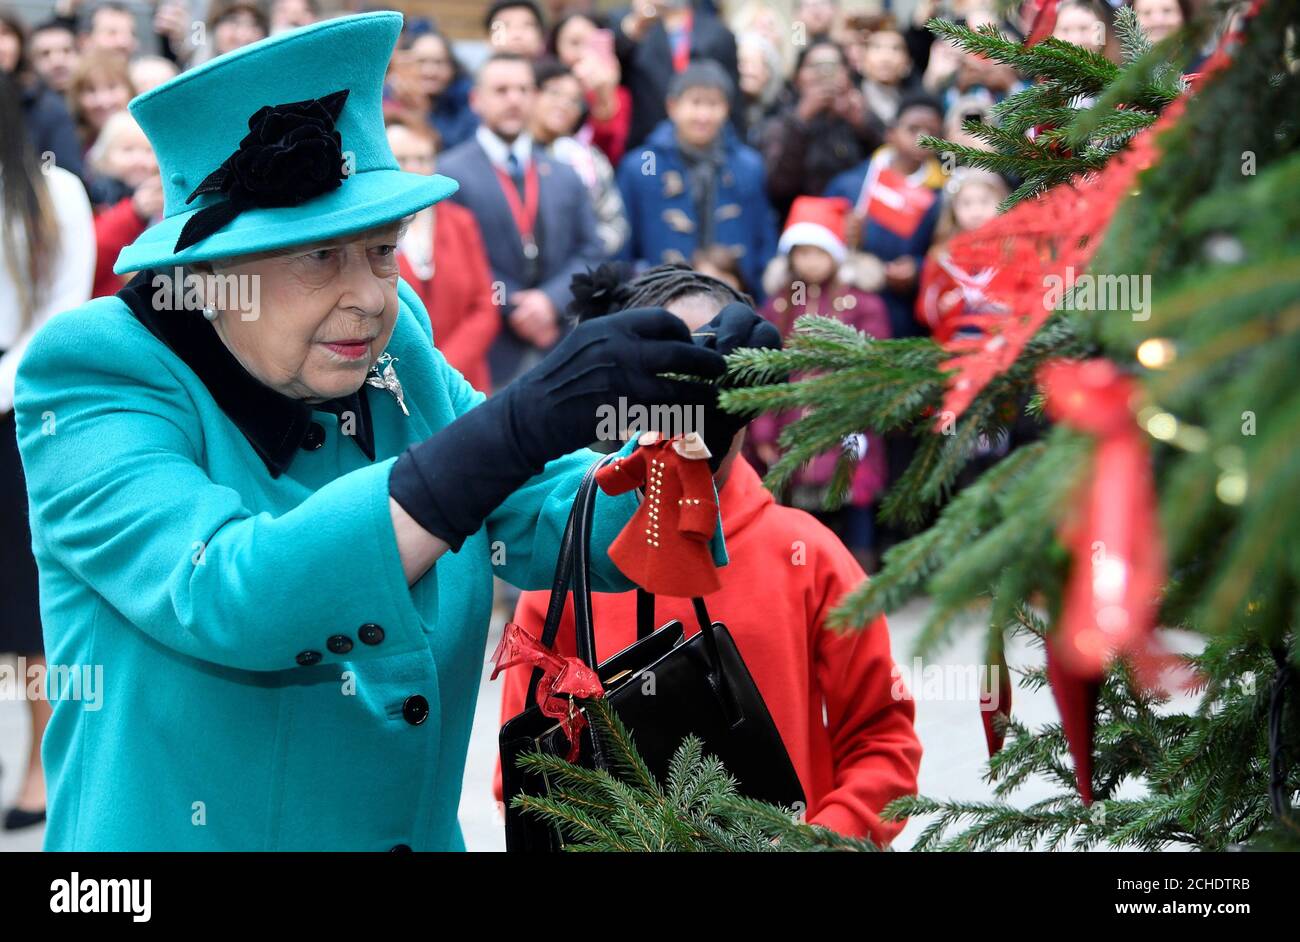 Queen Elizabeth II and Shylah Gordon, aged 8, attach a bauble to a Christmas tree during her visit to Coram, the UK's oldest children's charity, to open the Queen Elizabeth II Centre at its base in central London. Stock Photo